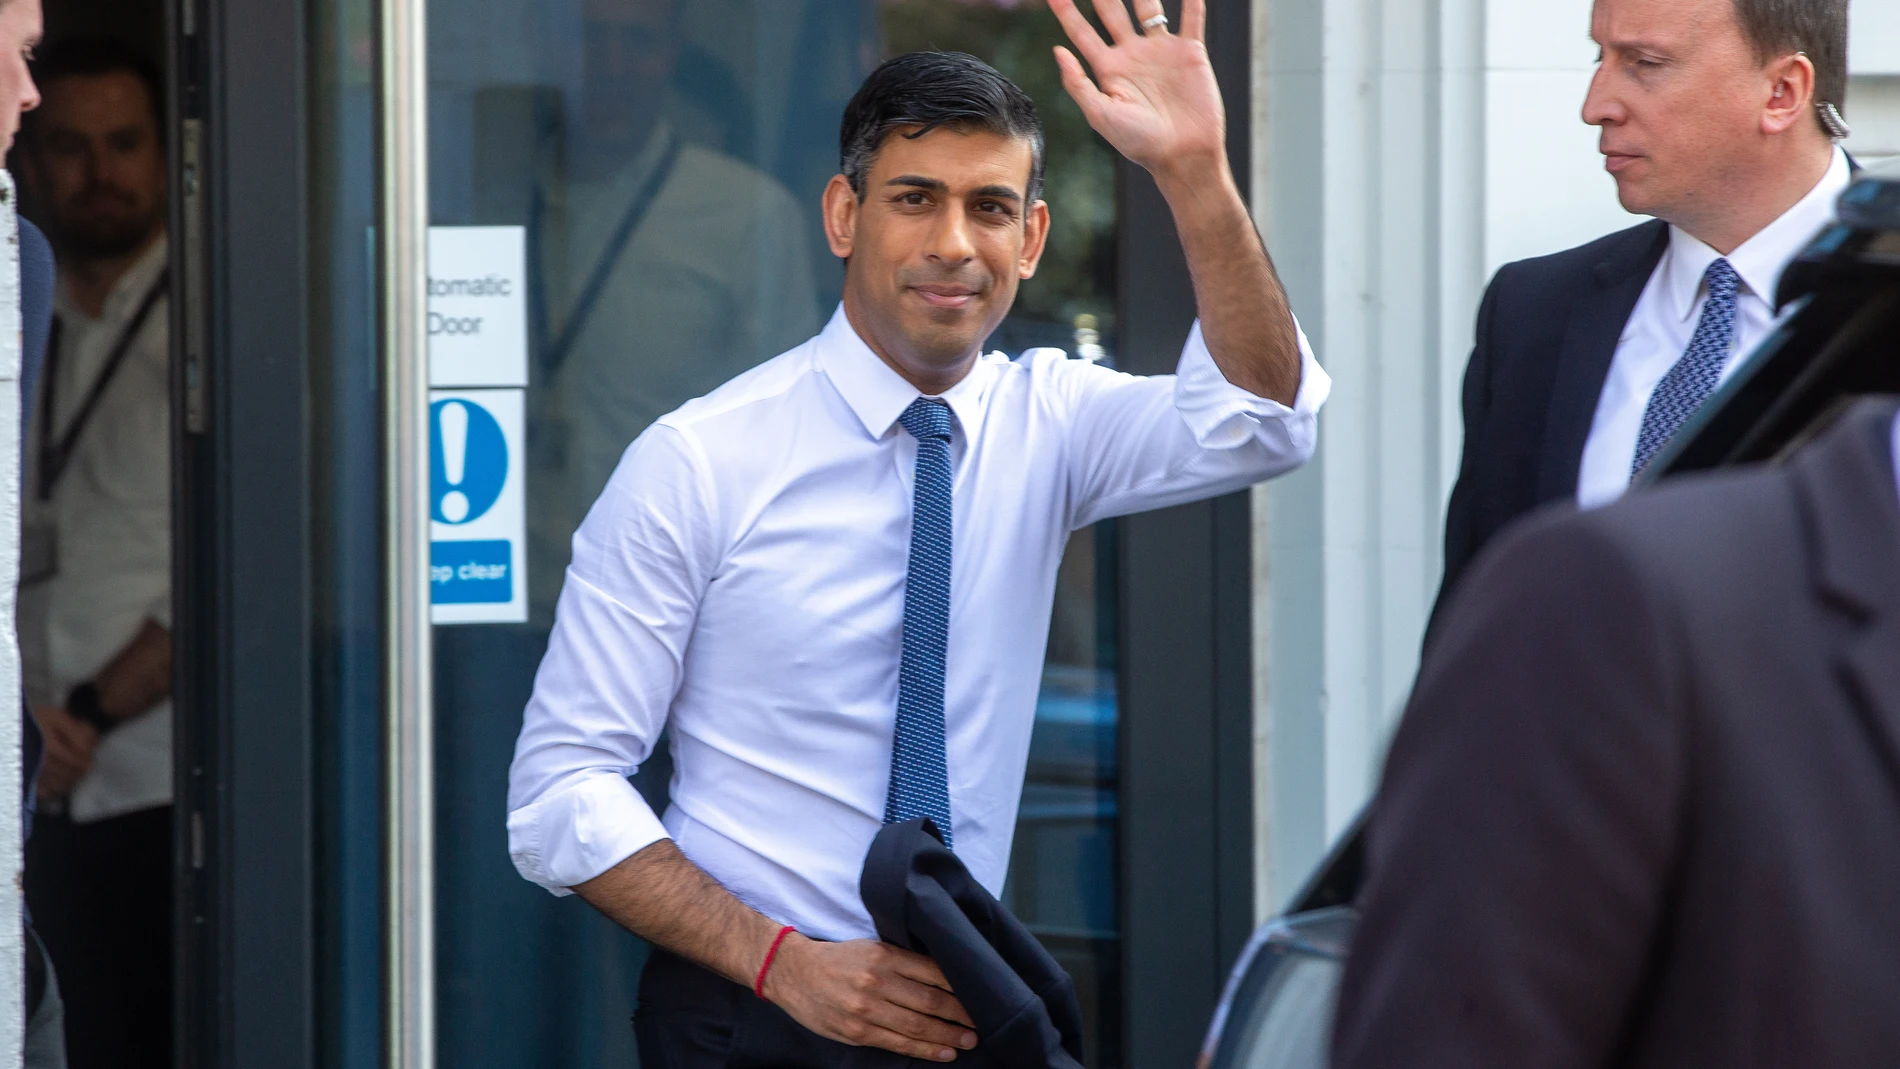 April 17, 2023, London, England, United Kingdom: UK Prime Minister RISHI SUNAK is seen leaving London Screen Academy after delivering his speech on plans to improve math education. 17/04/2023